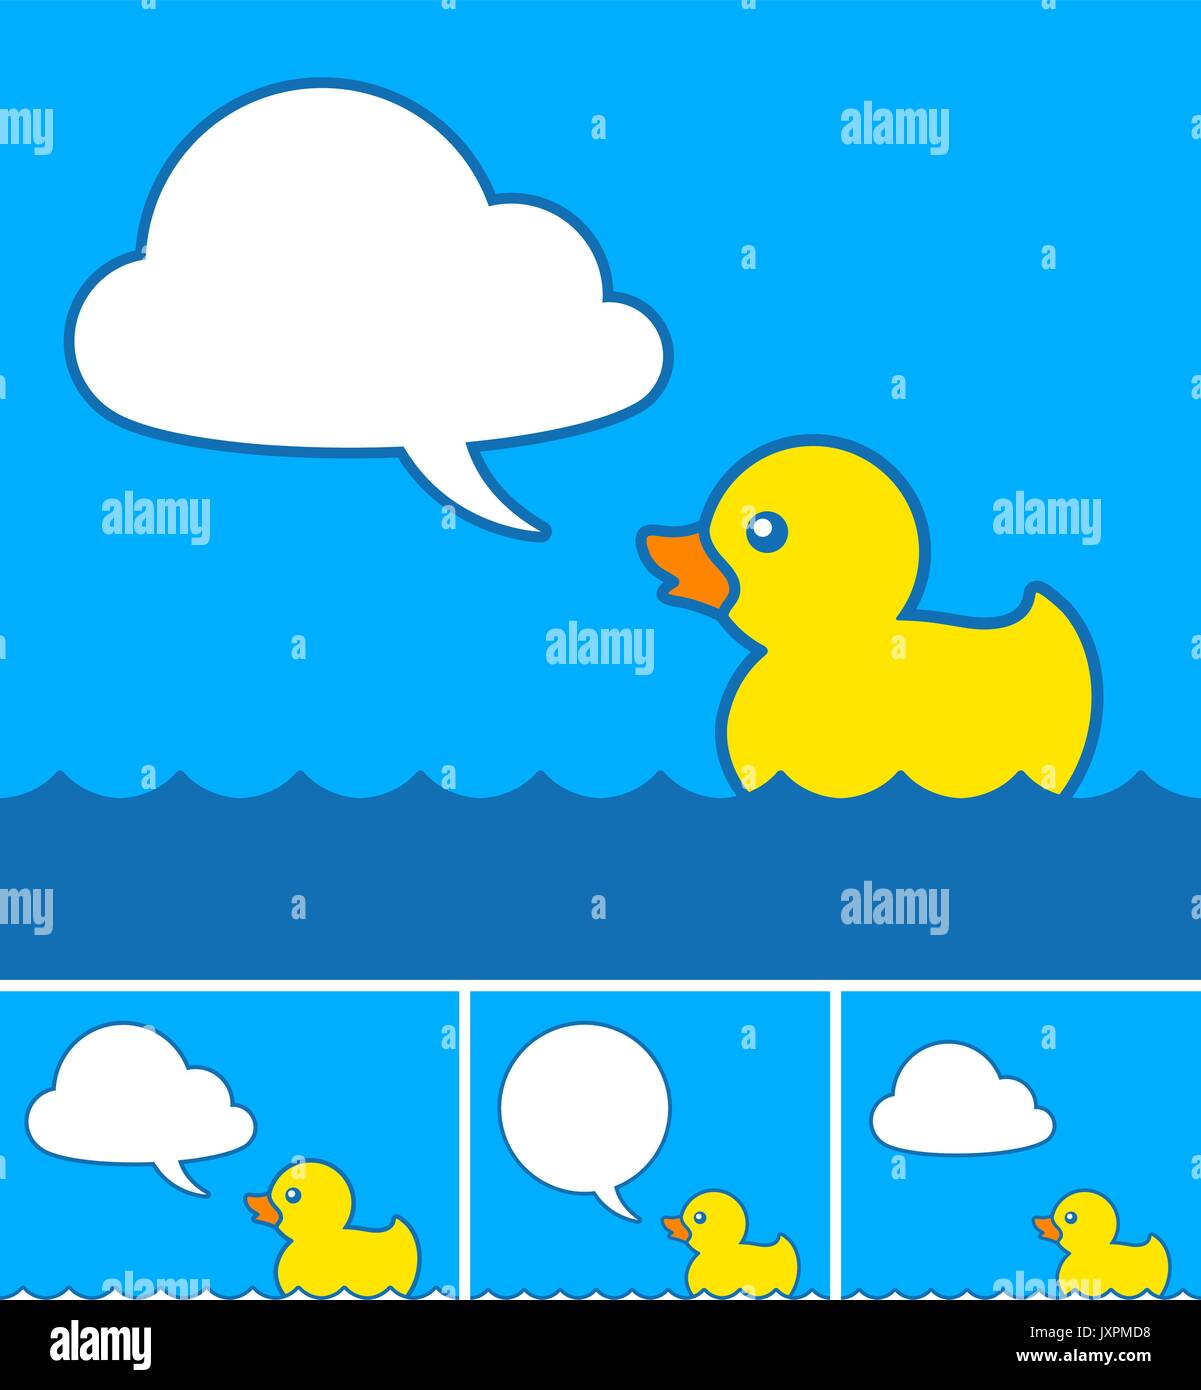 Cute little yellow cartoon rubber duck with cloud speech bubble floating on  blue water with four different variations, vector illustration Stock Vector  Image & Art - Alamy